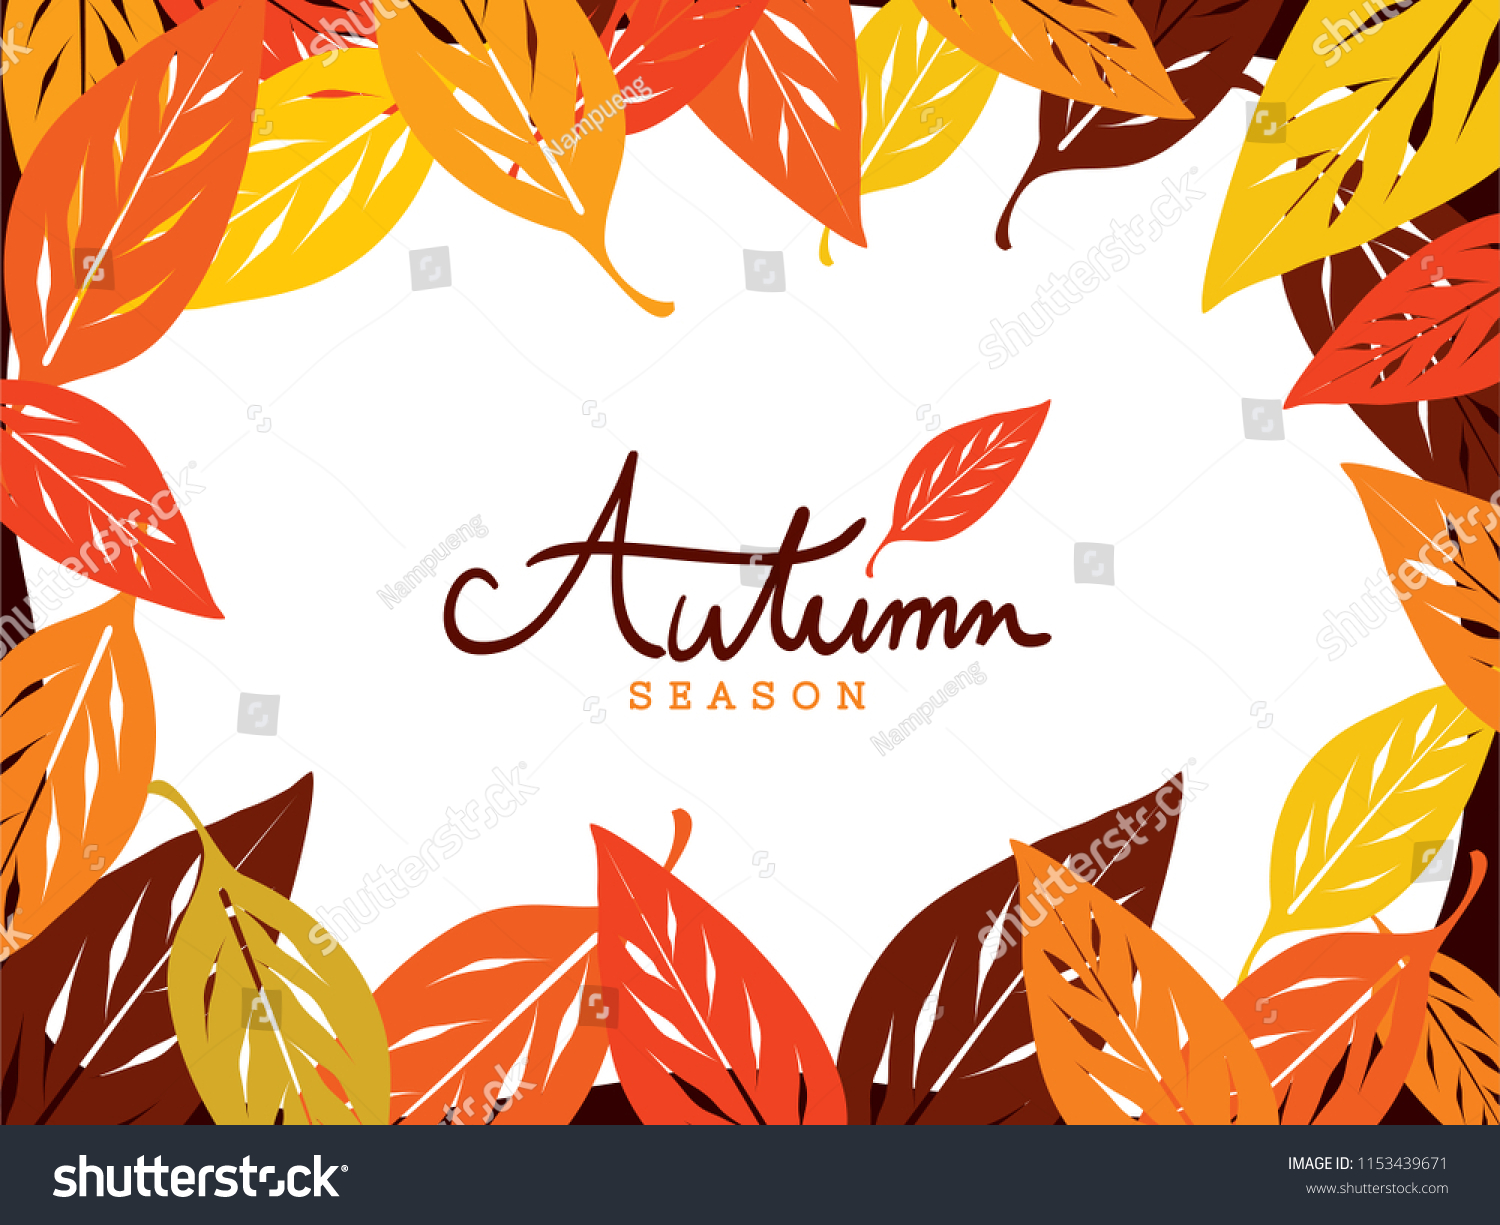 SVG of Colorful dogwood leaves around the frame on white background with hand written font 